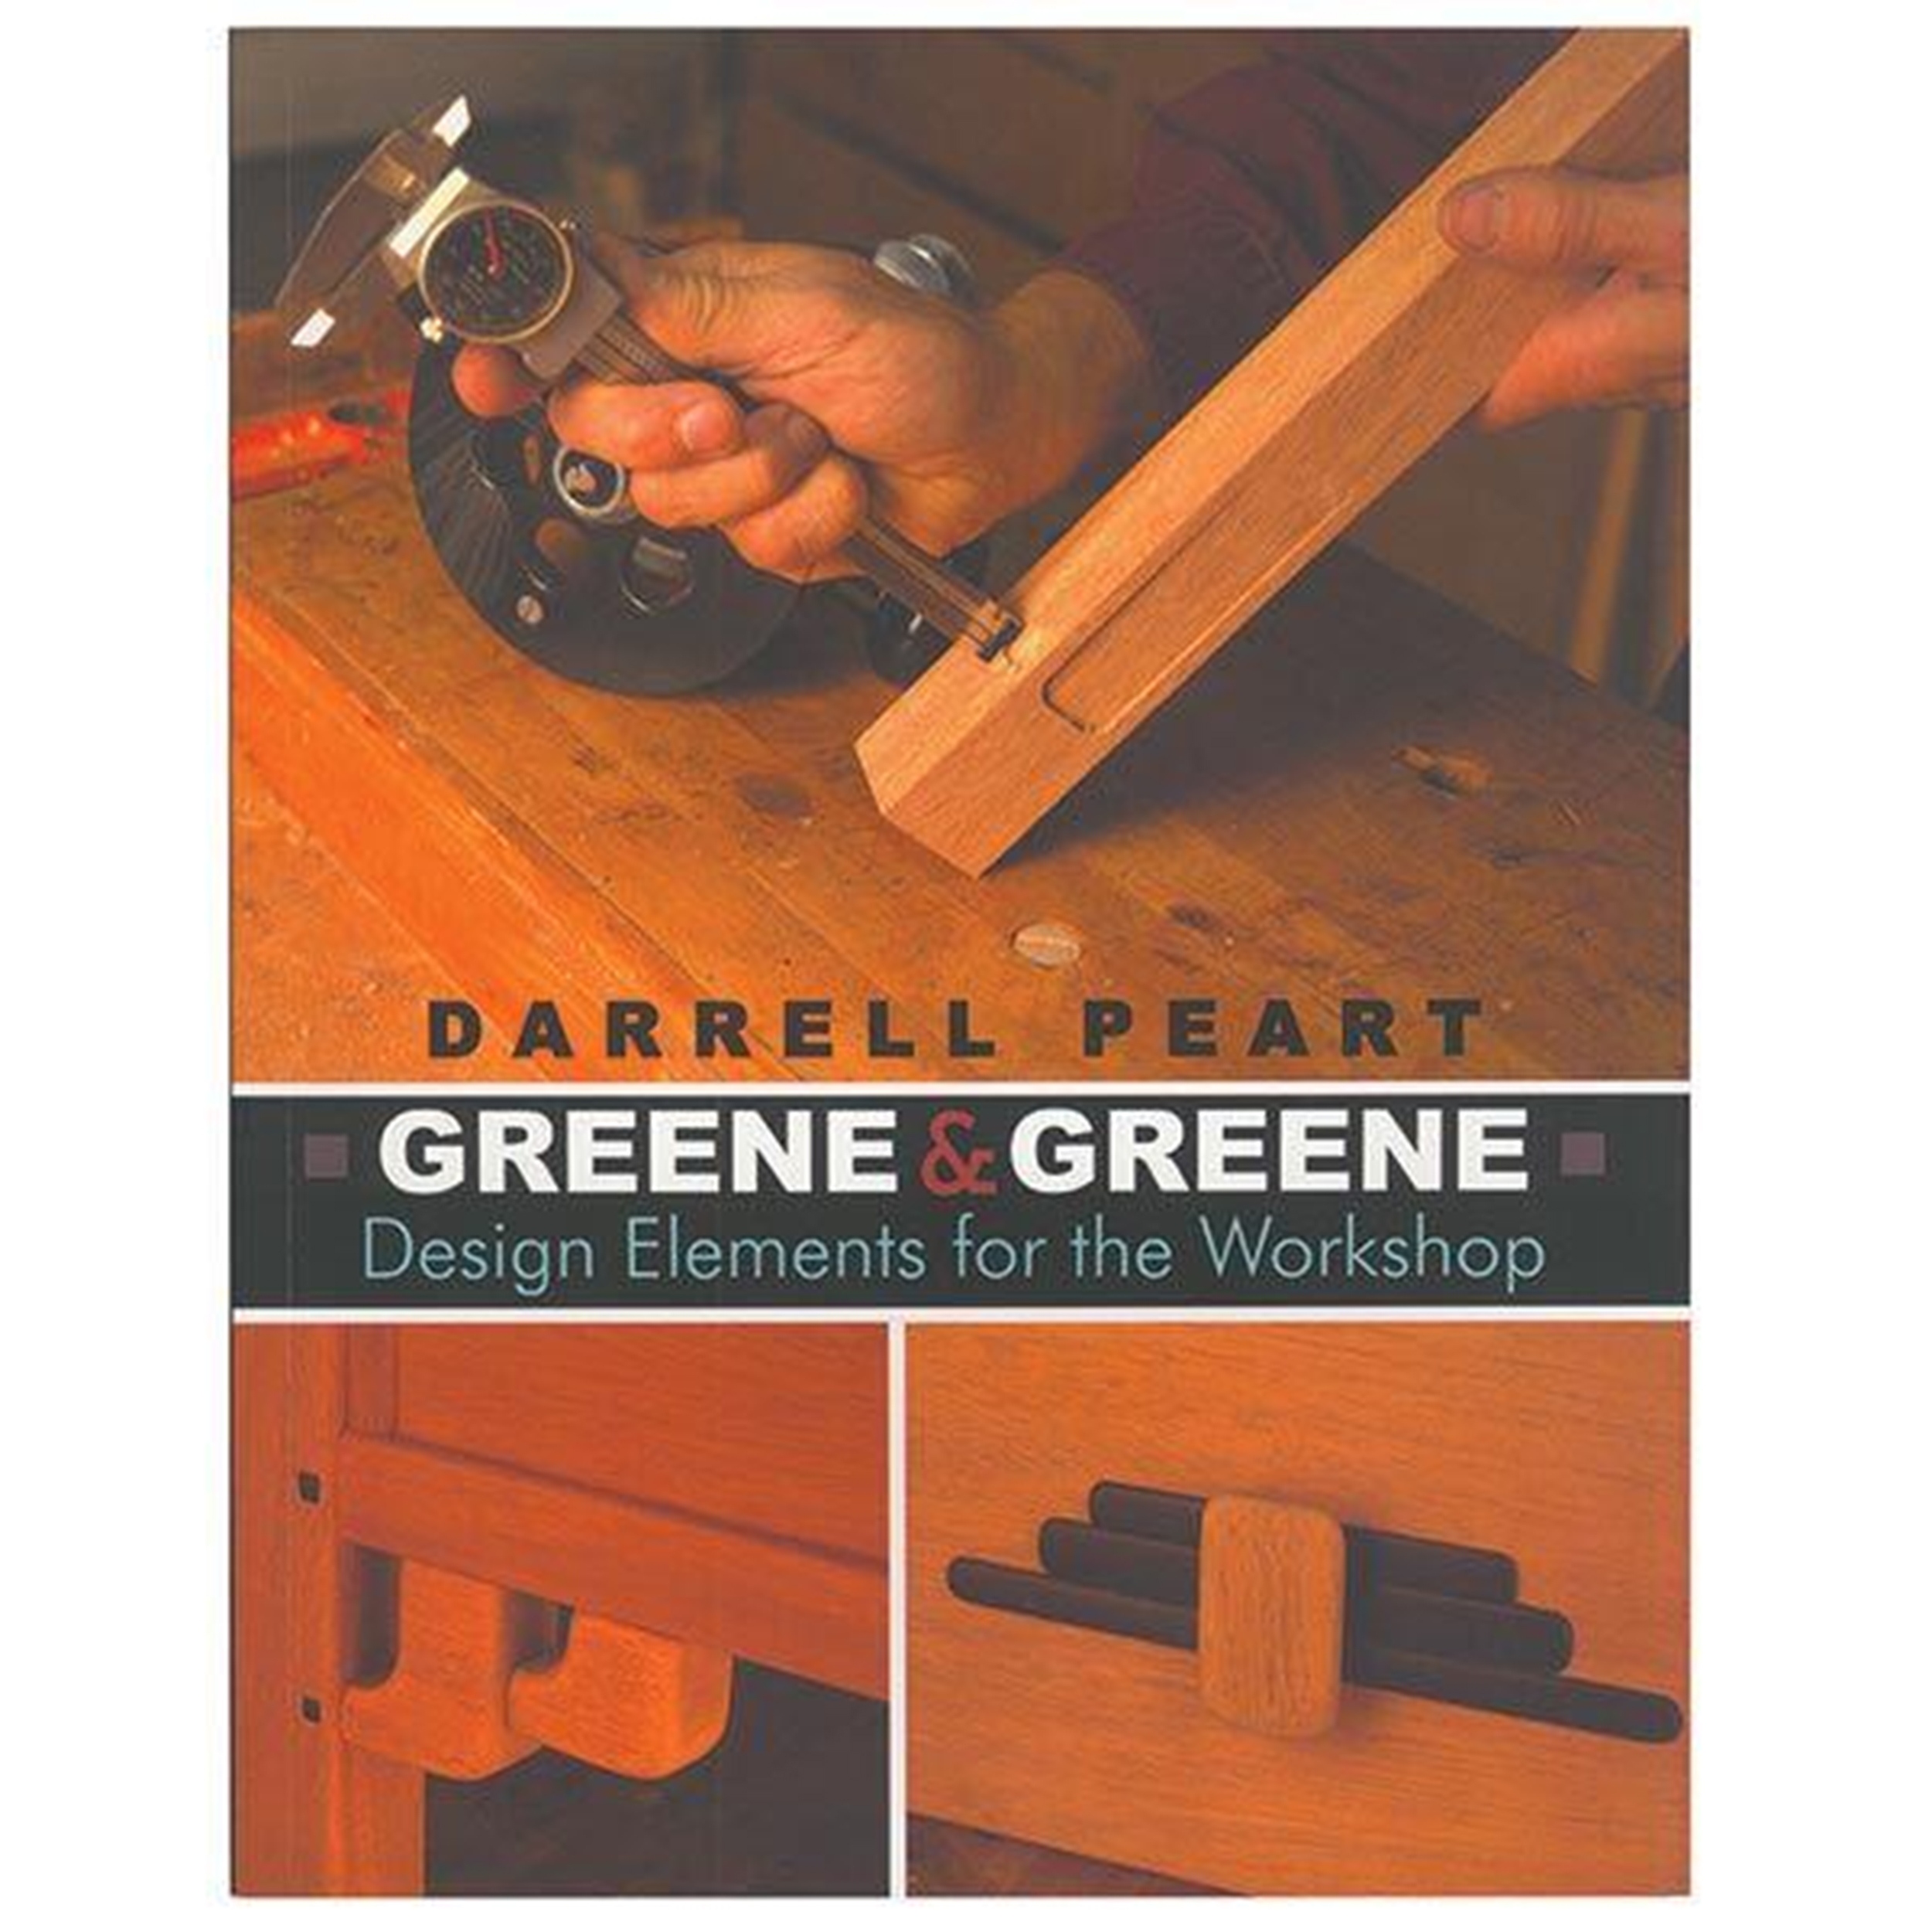 Greene & Greene Design Elements For The Workshop By Darrell Peart